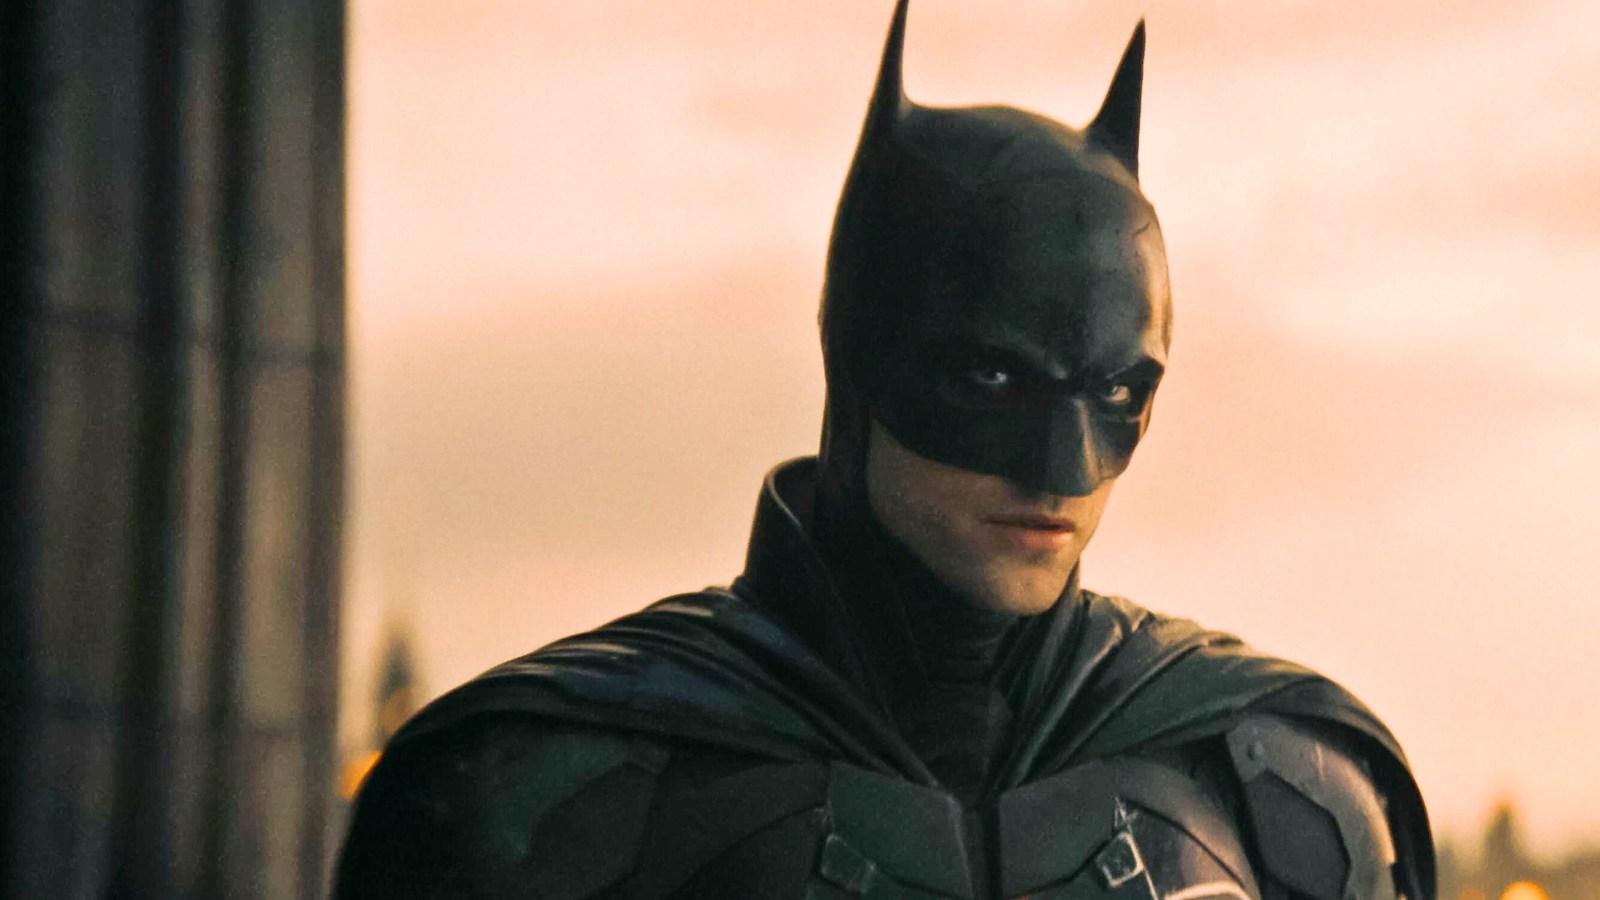 The Batman 2 release date, cast and more